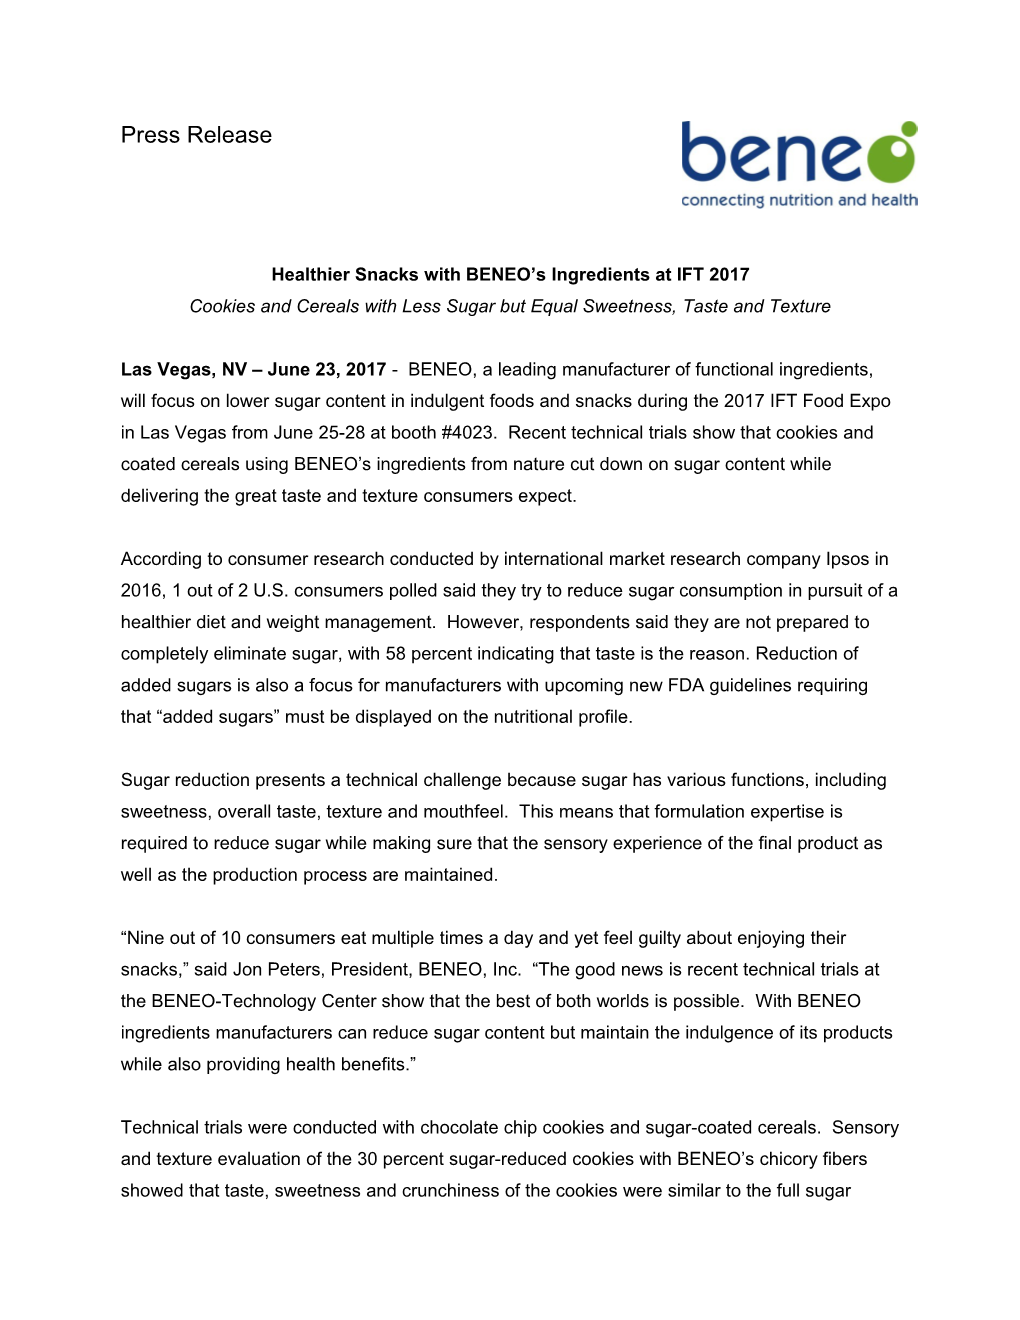 Healthier Snacks with BENEO S Ingredients at IFT 2017